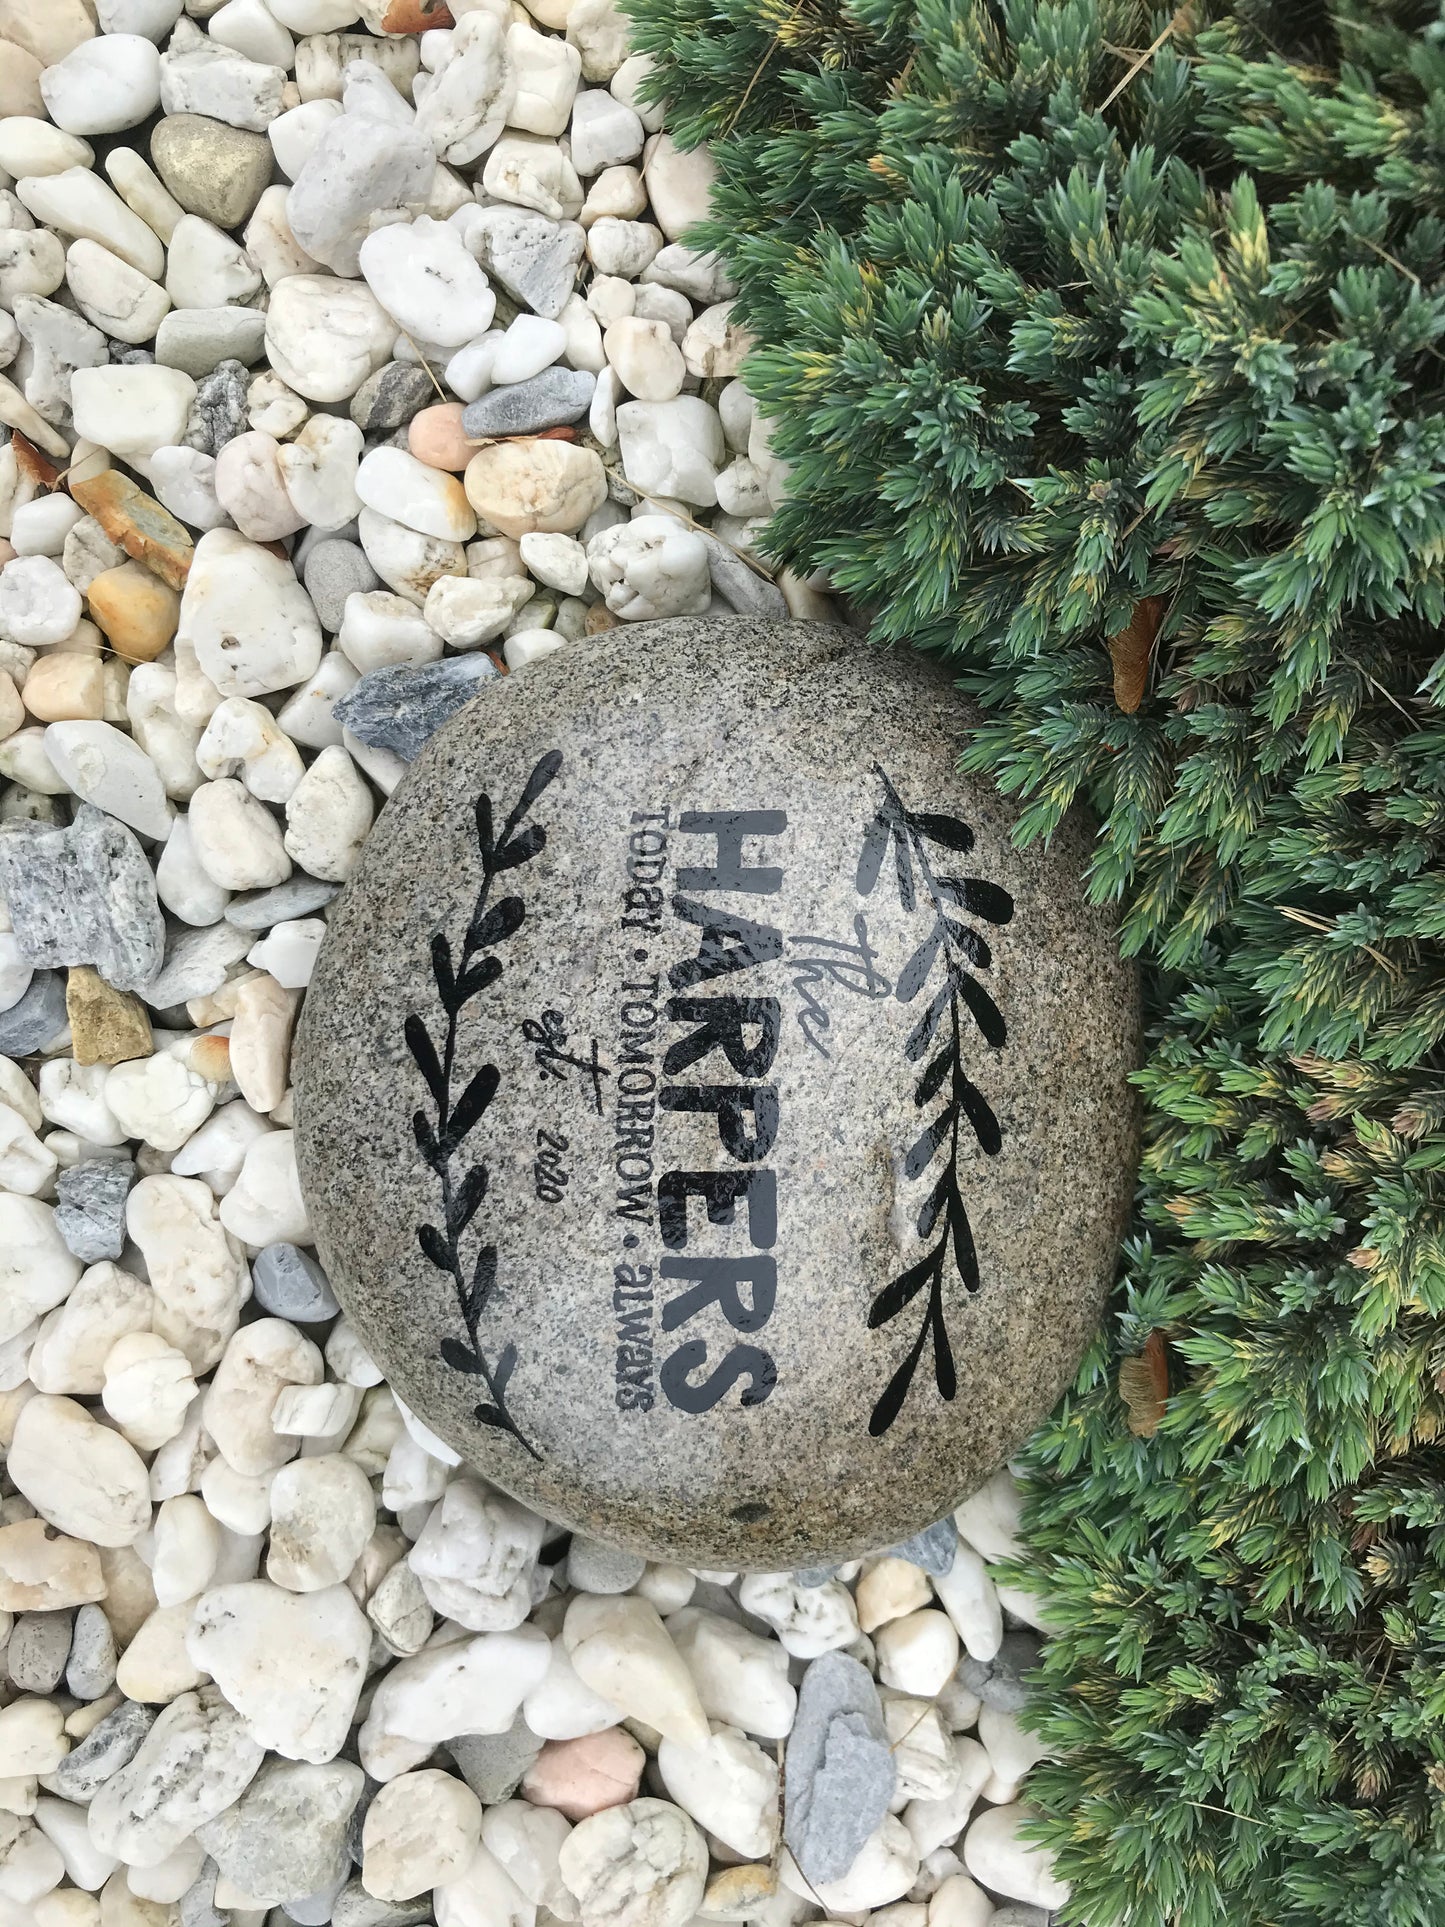 Personalized Large Decorative Garden Stone - Our Family